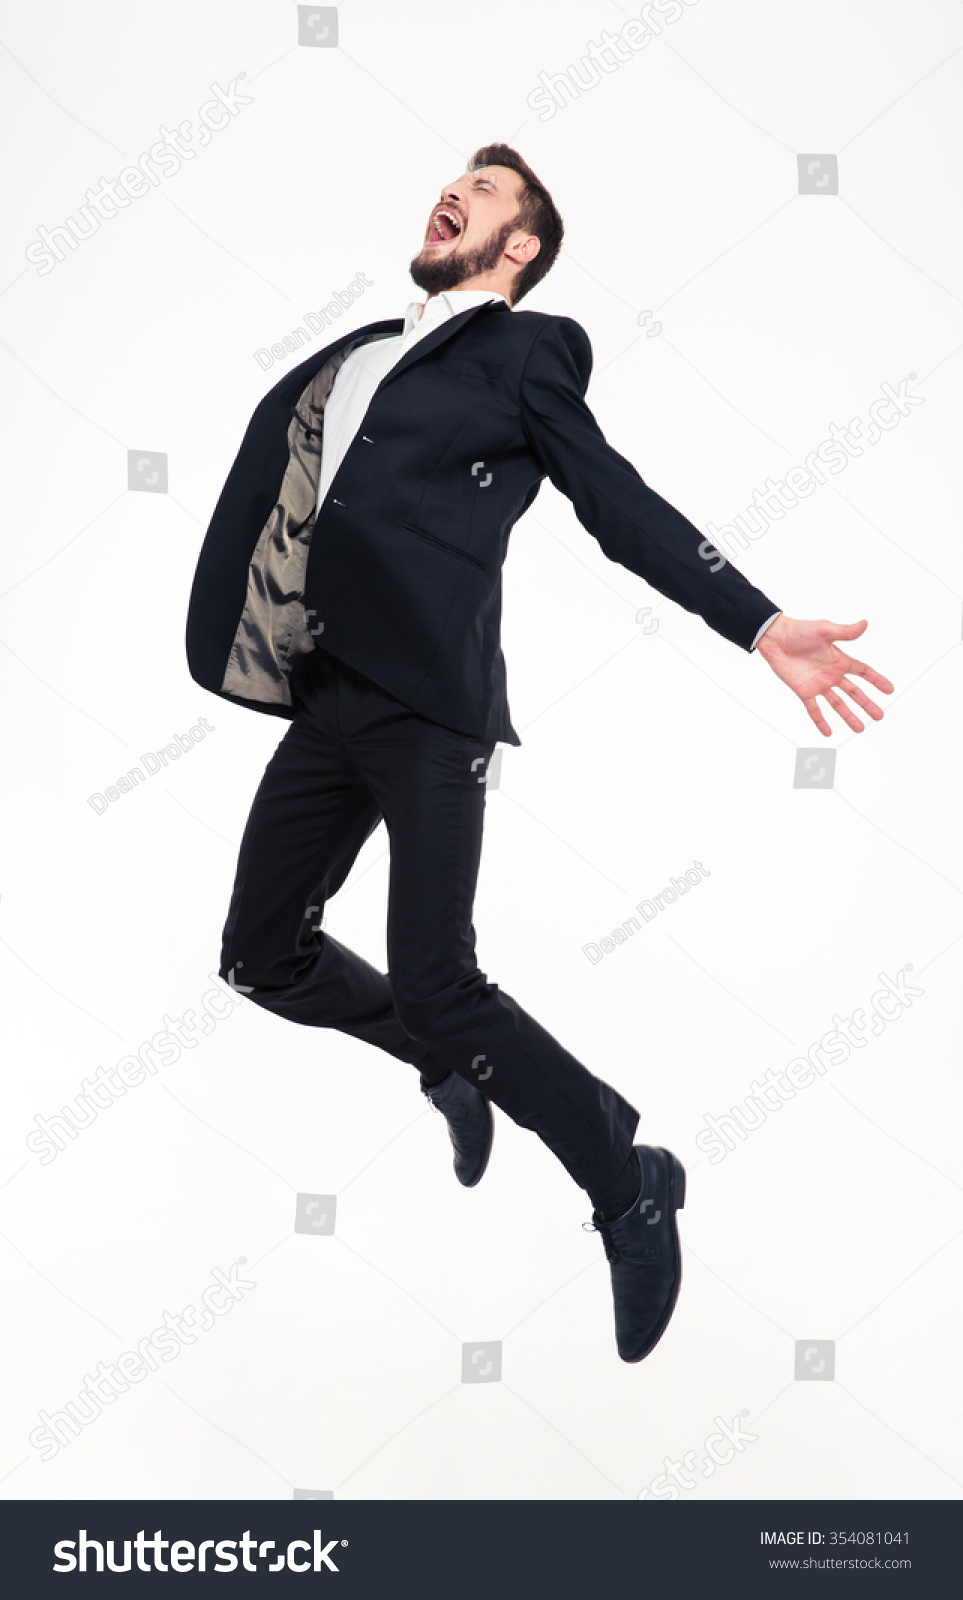 Excited elated happy young business man with beard in classic suit jumping and shouting over white background #354081041